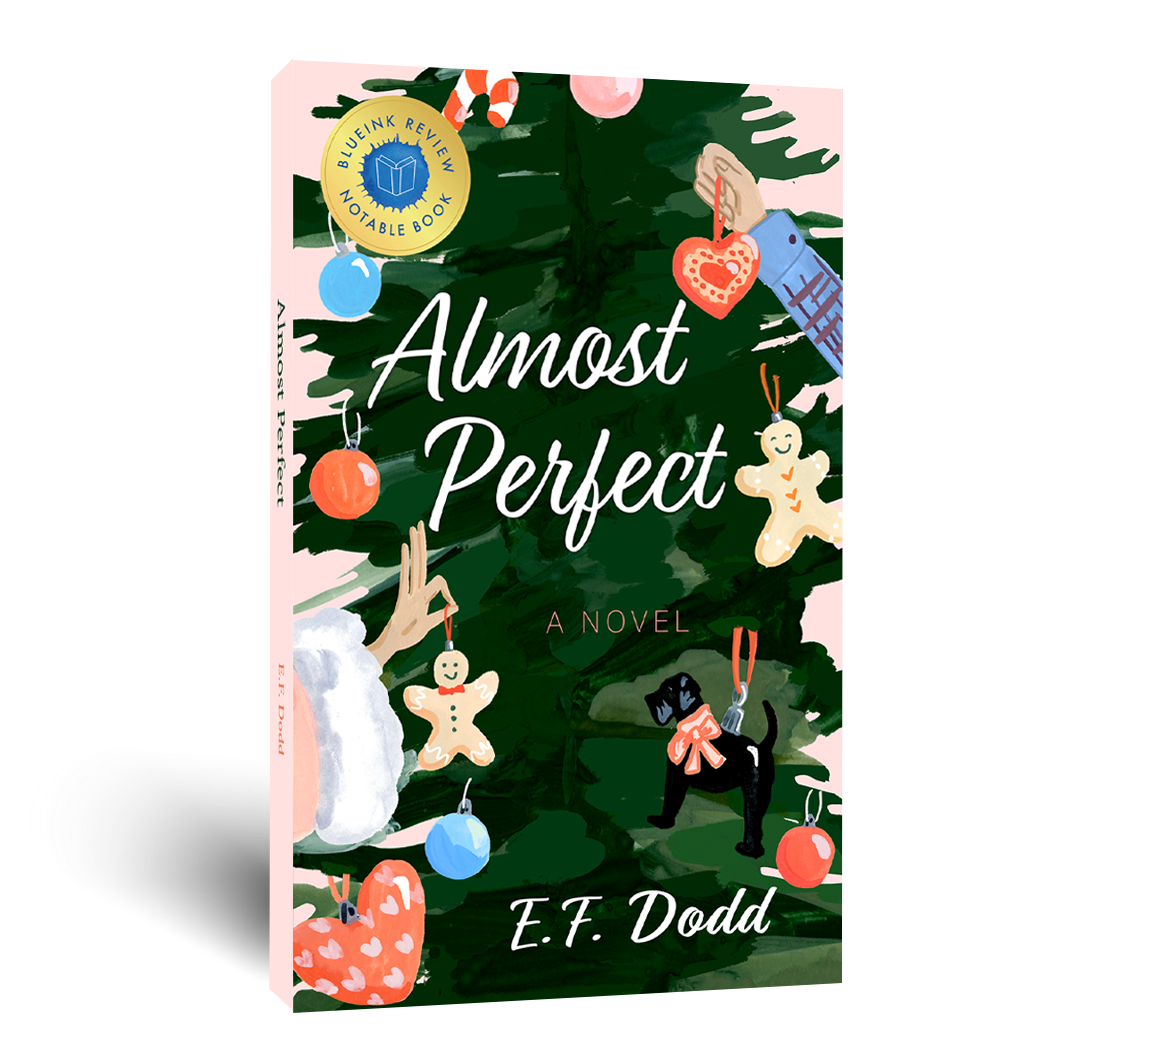 Almost Perfect, available now